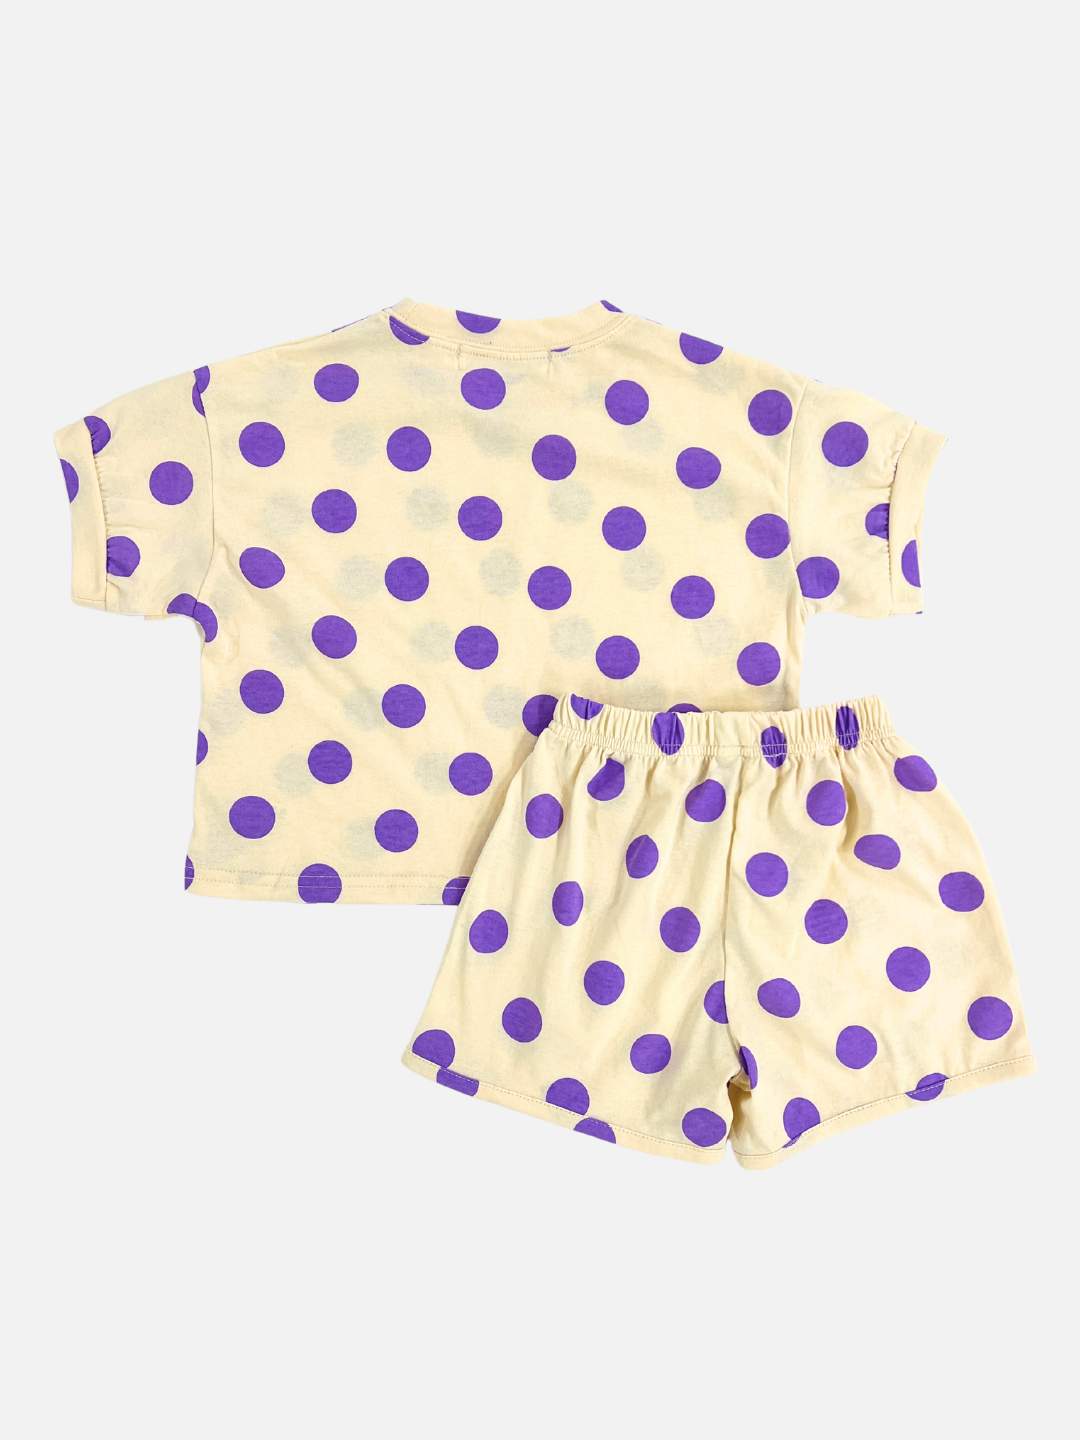 Purple | A kids' tee shirt and shorts set in a pettern of purple dots on an ecru background, back view